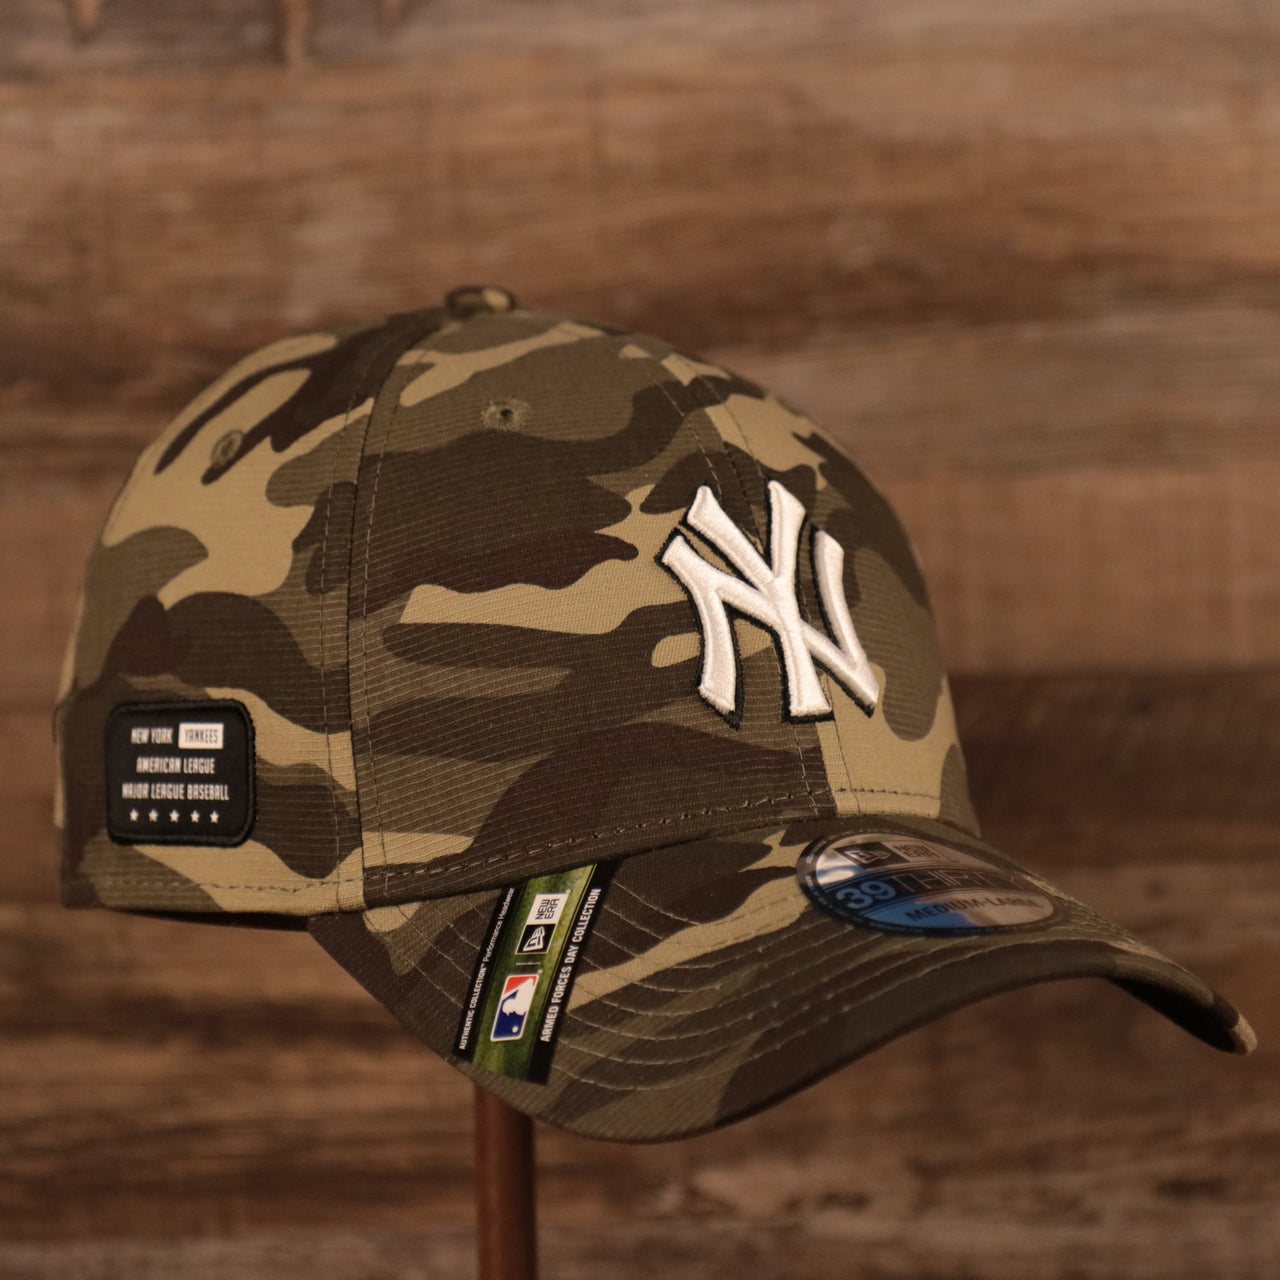 The American League side patch Memorial Day On Field Hat for the New York Yankees.